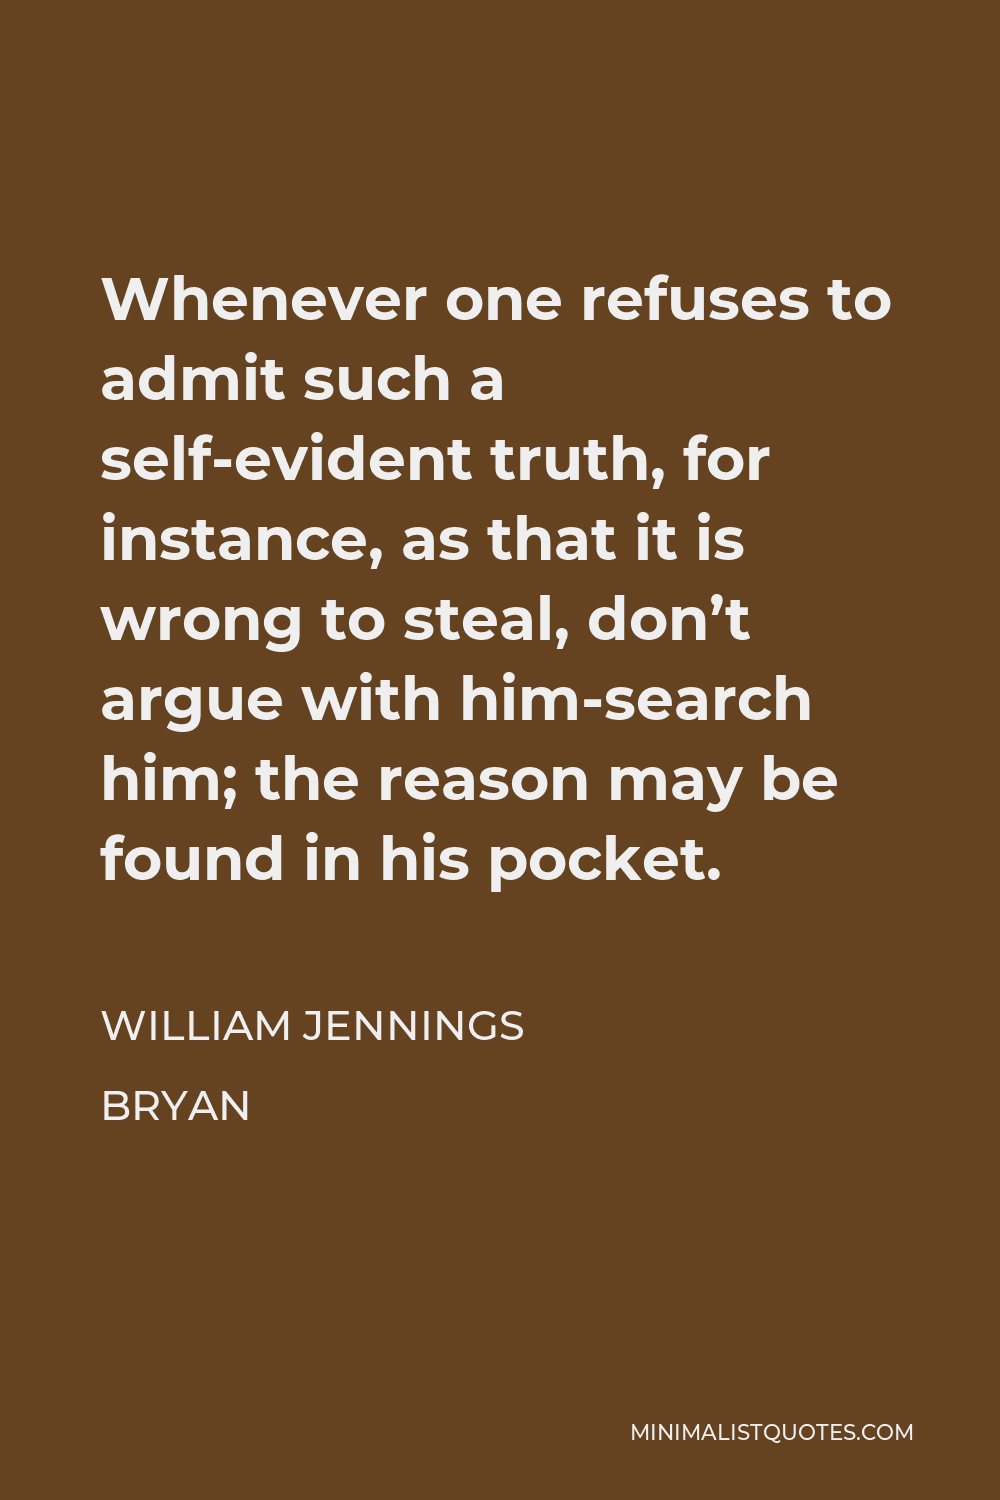 William Jennings Bryan Quote - Whenever one refuses to admit such a self-evident truth, for instance, as that it is wrong to steal, don’t argue with him-search him; the reason may be found in his pocket.